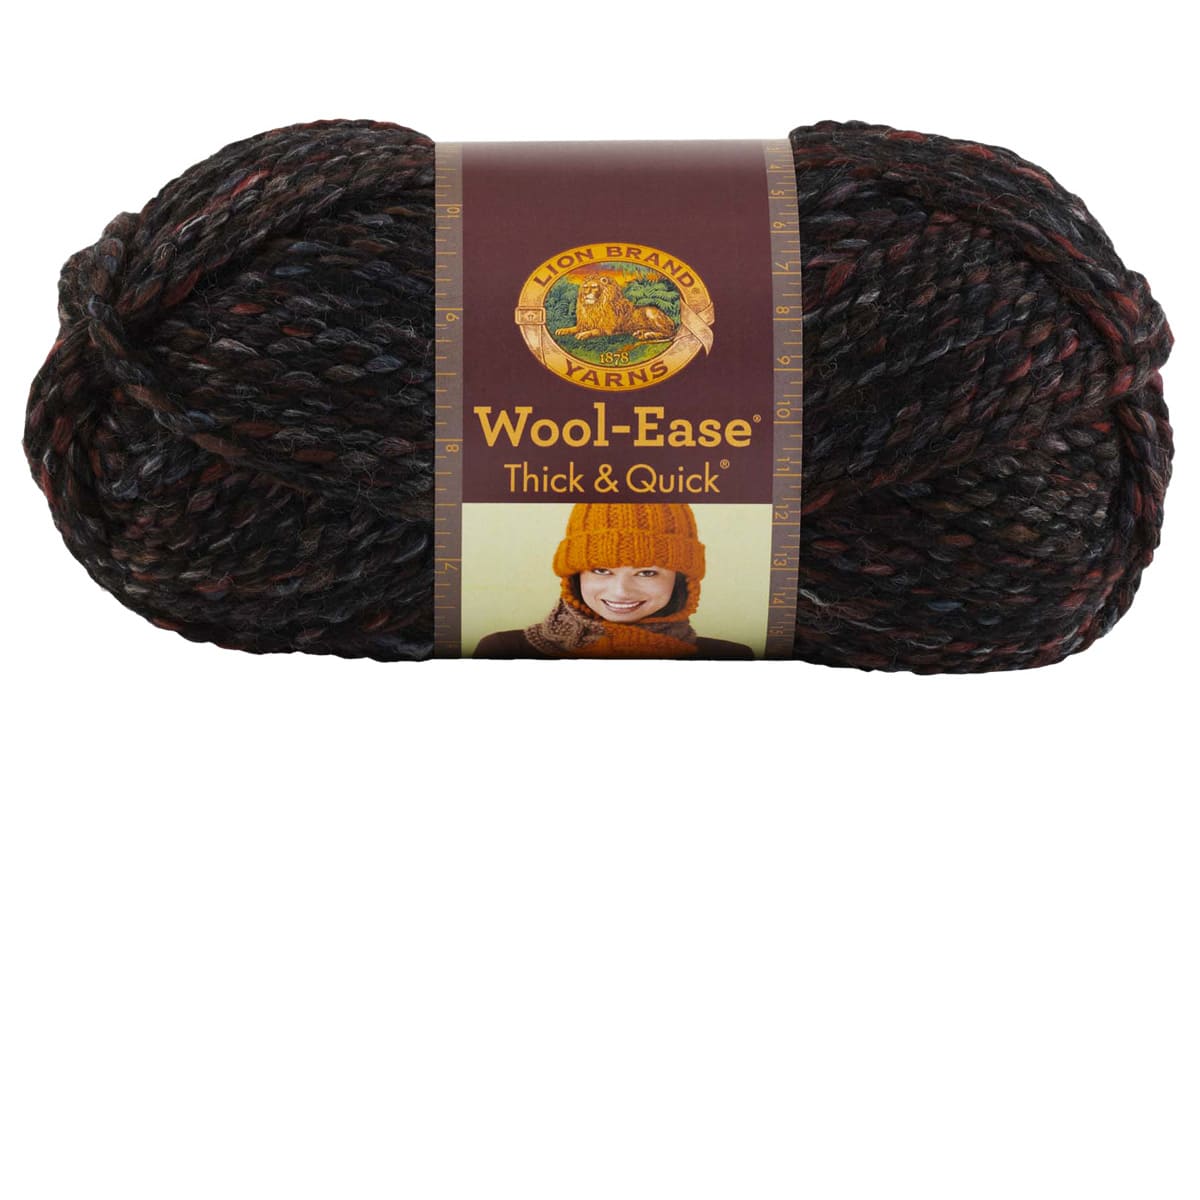 Lion Brand Wool-Ease Thick & Quick Yarn-Licorice, 1 count - Harris